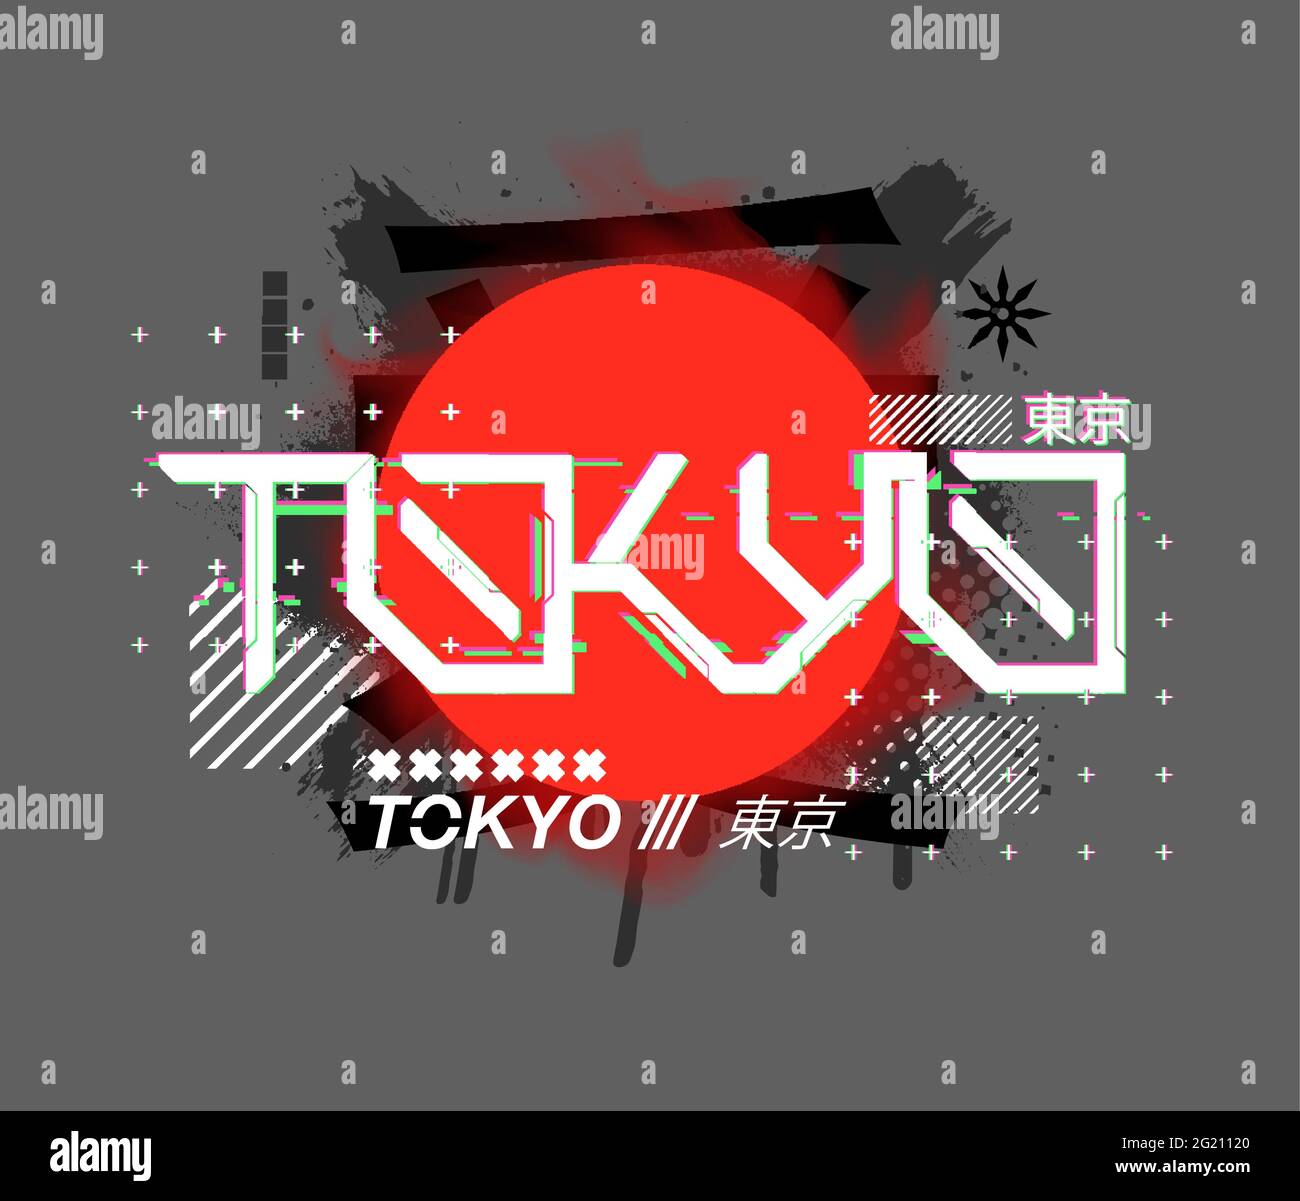 Tokyo artwork for design merch, t-shirt, posters. A traditional symbol for the rising sun of japan with futuristic lettering and modern touches Stock Vector